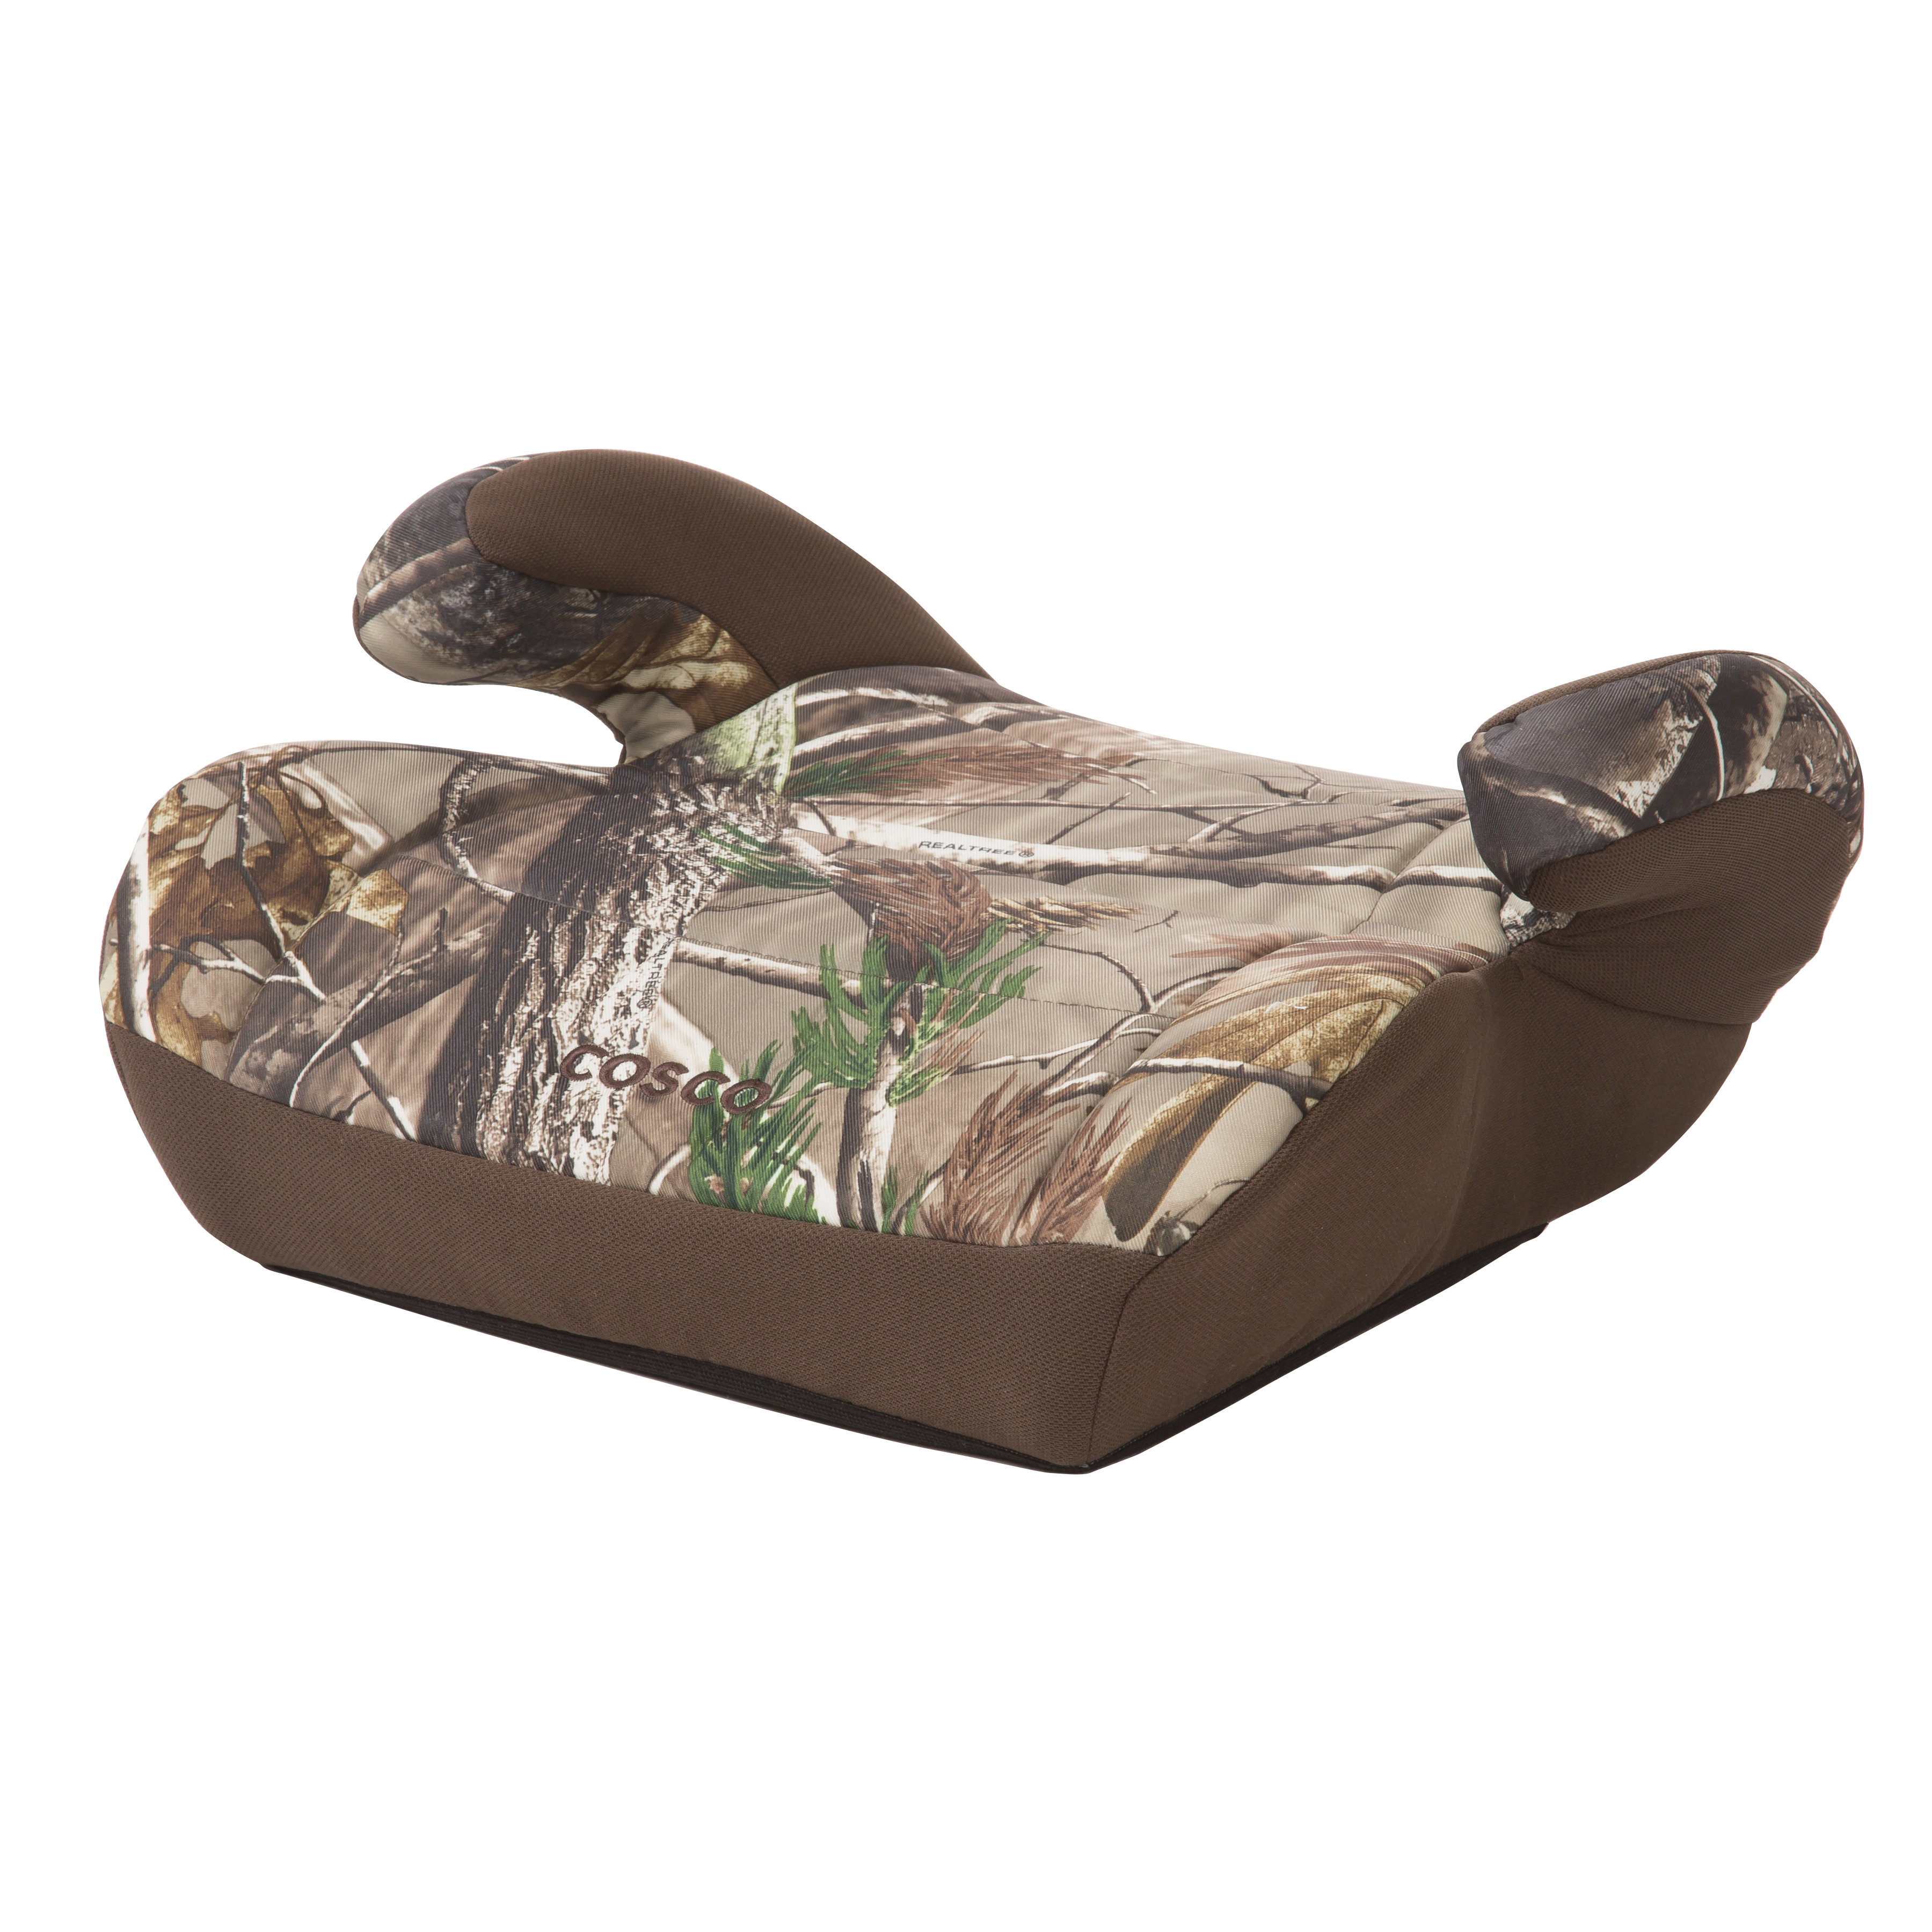 Cosco Top Side Booster Car Seat -Realtree Brown